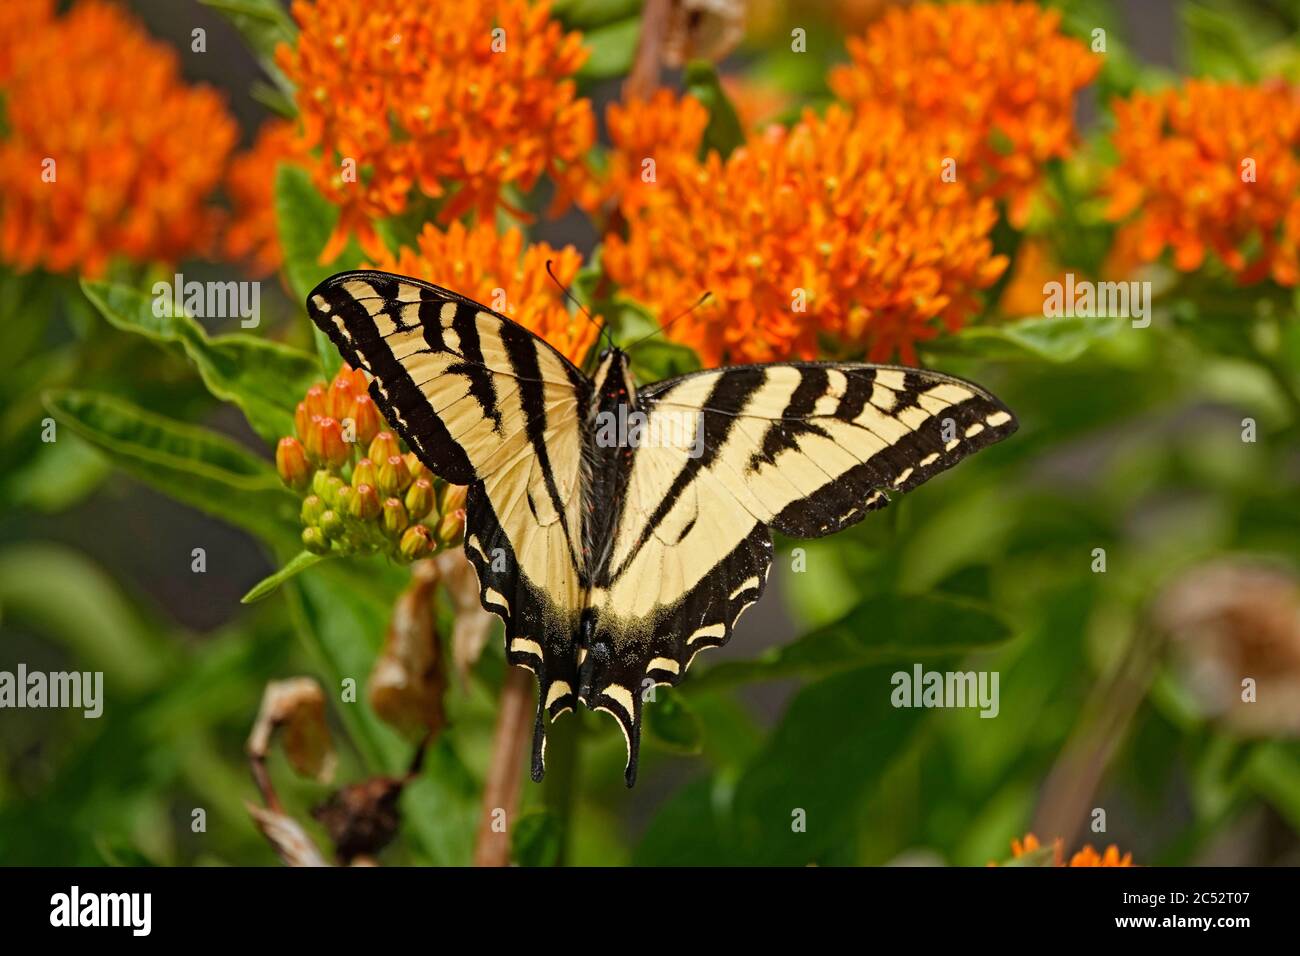 A western tiger swallowtail butterfly sipping nectar from a flower in a large flower garden in the Willamette Valley, Oregon. Stock Photo